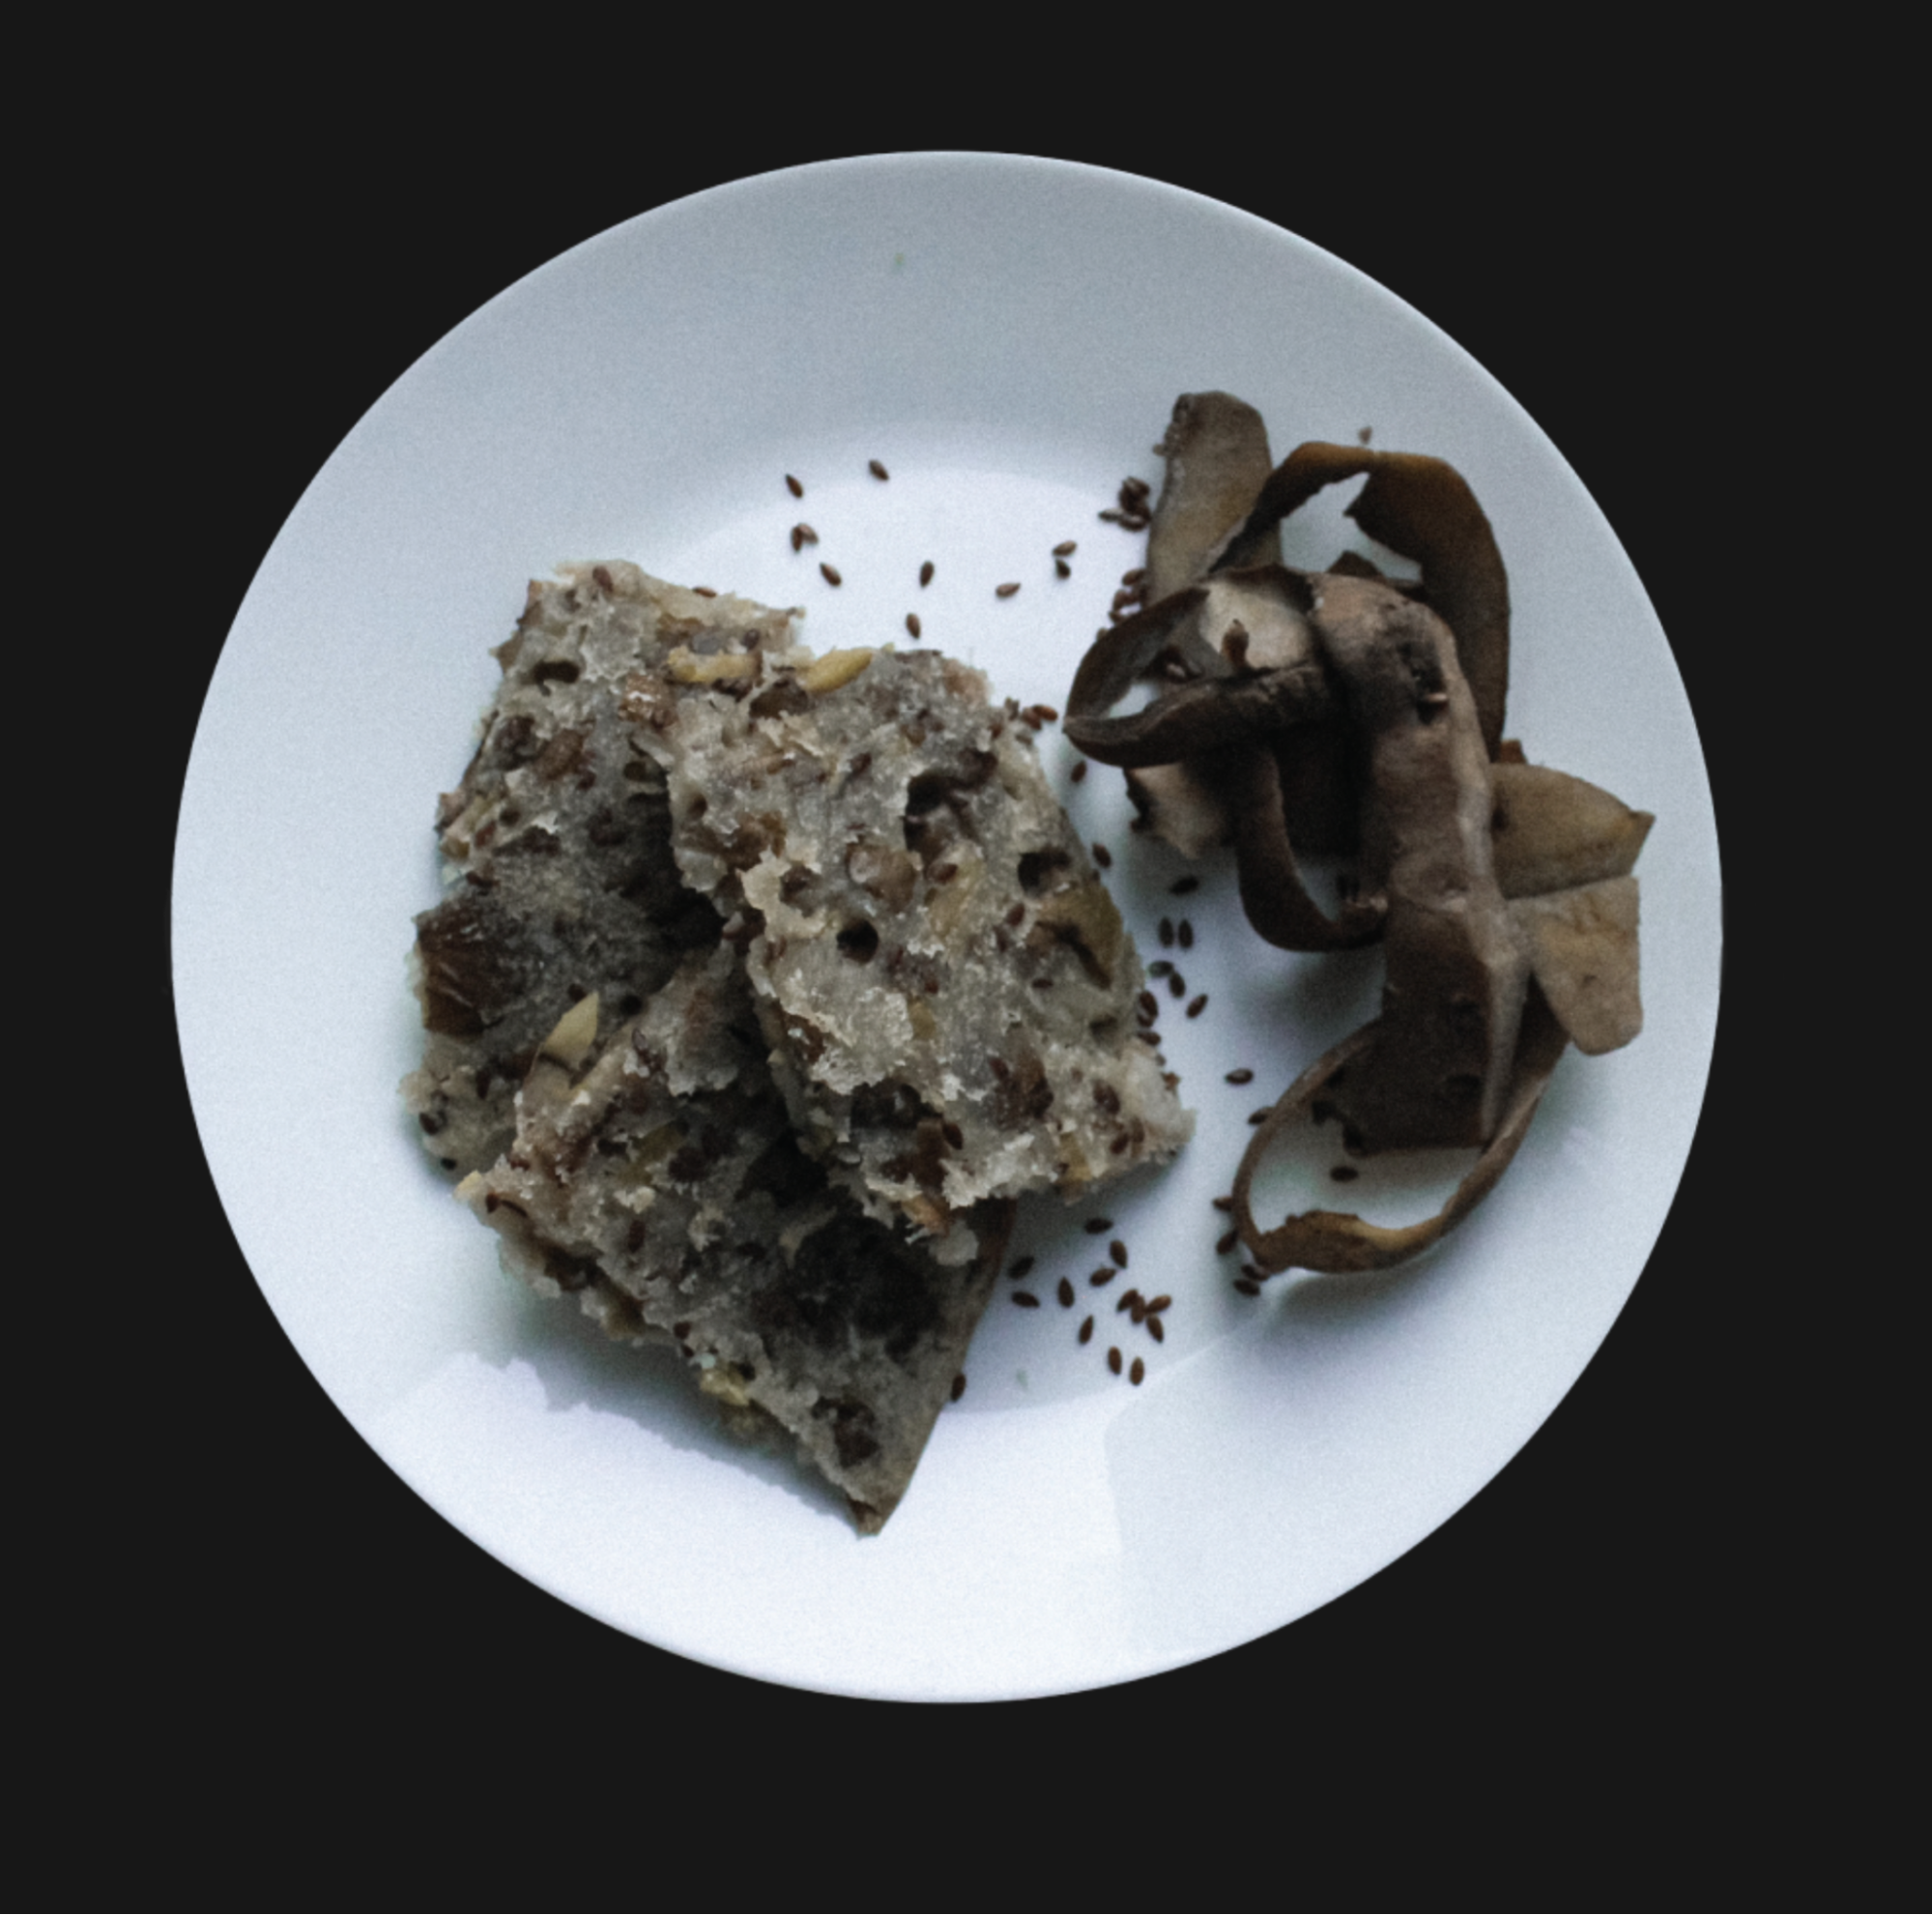 A brown-gray flatbread broken into three pieces on a plate. Garnished with dried grass and scattered flax seed.